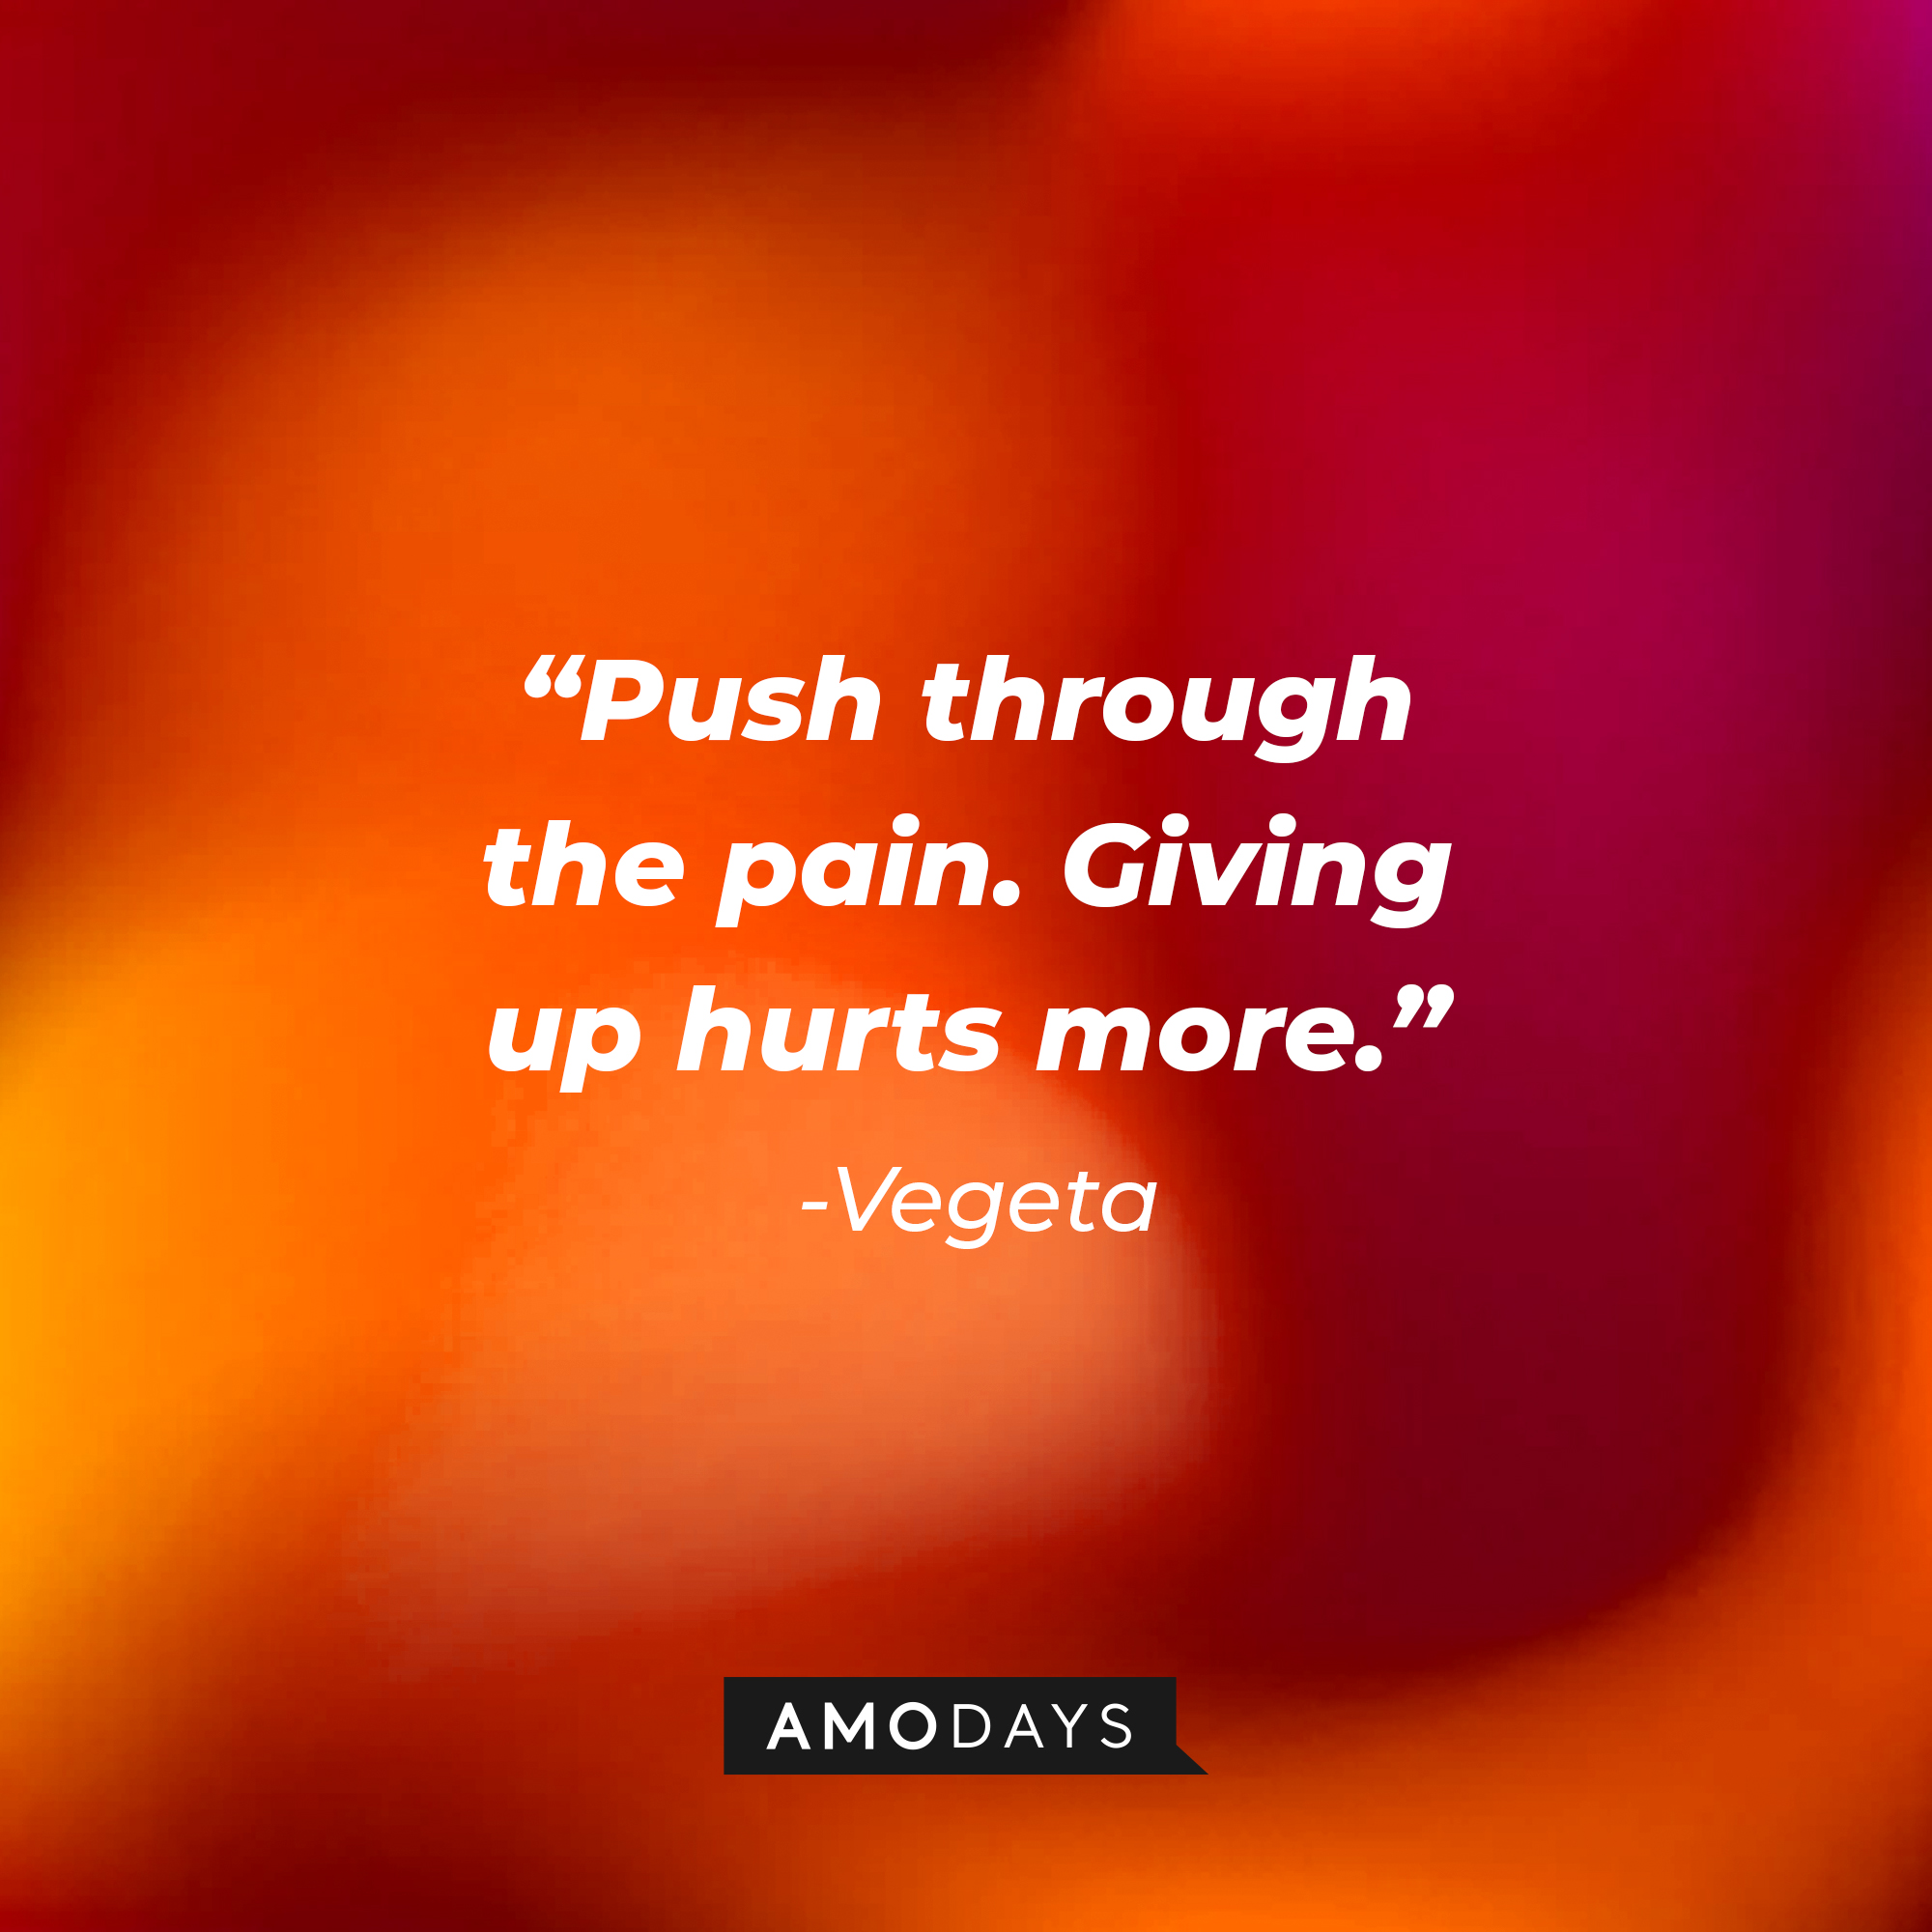 Vegeta’s quote: "Push through the pain. Giving up hurts more. ” | Source: AmoDays